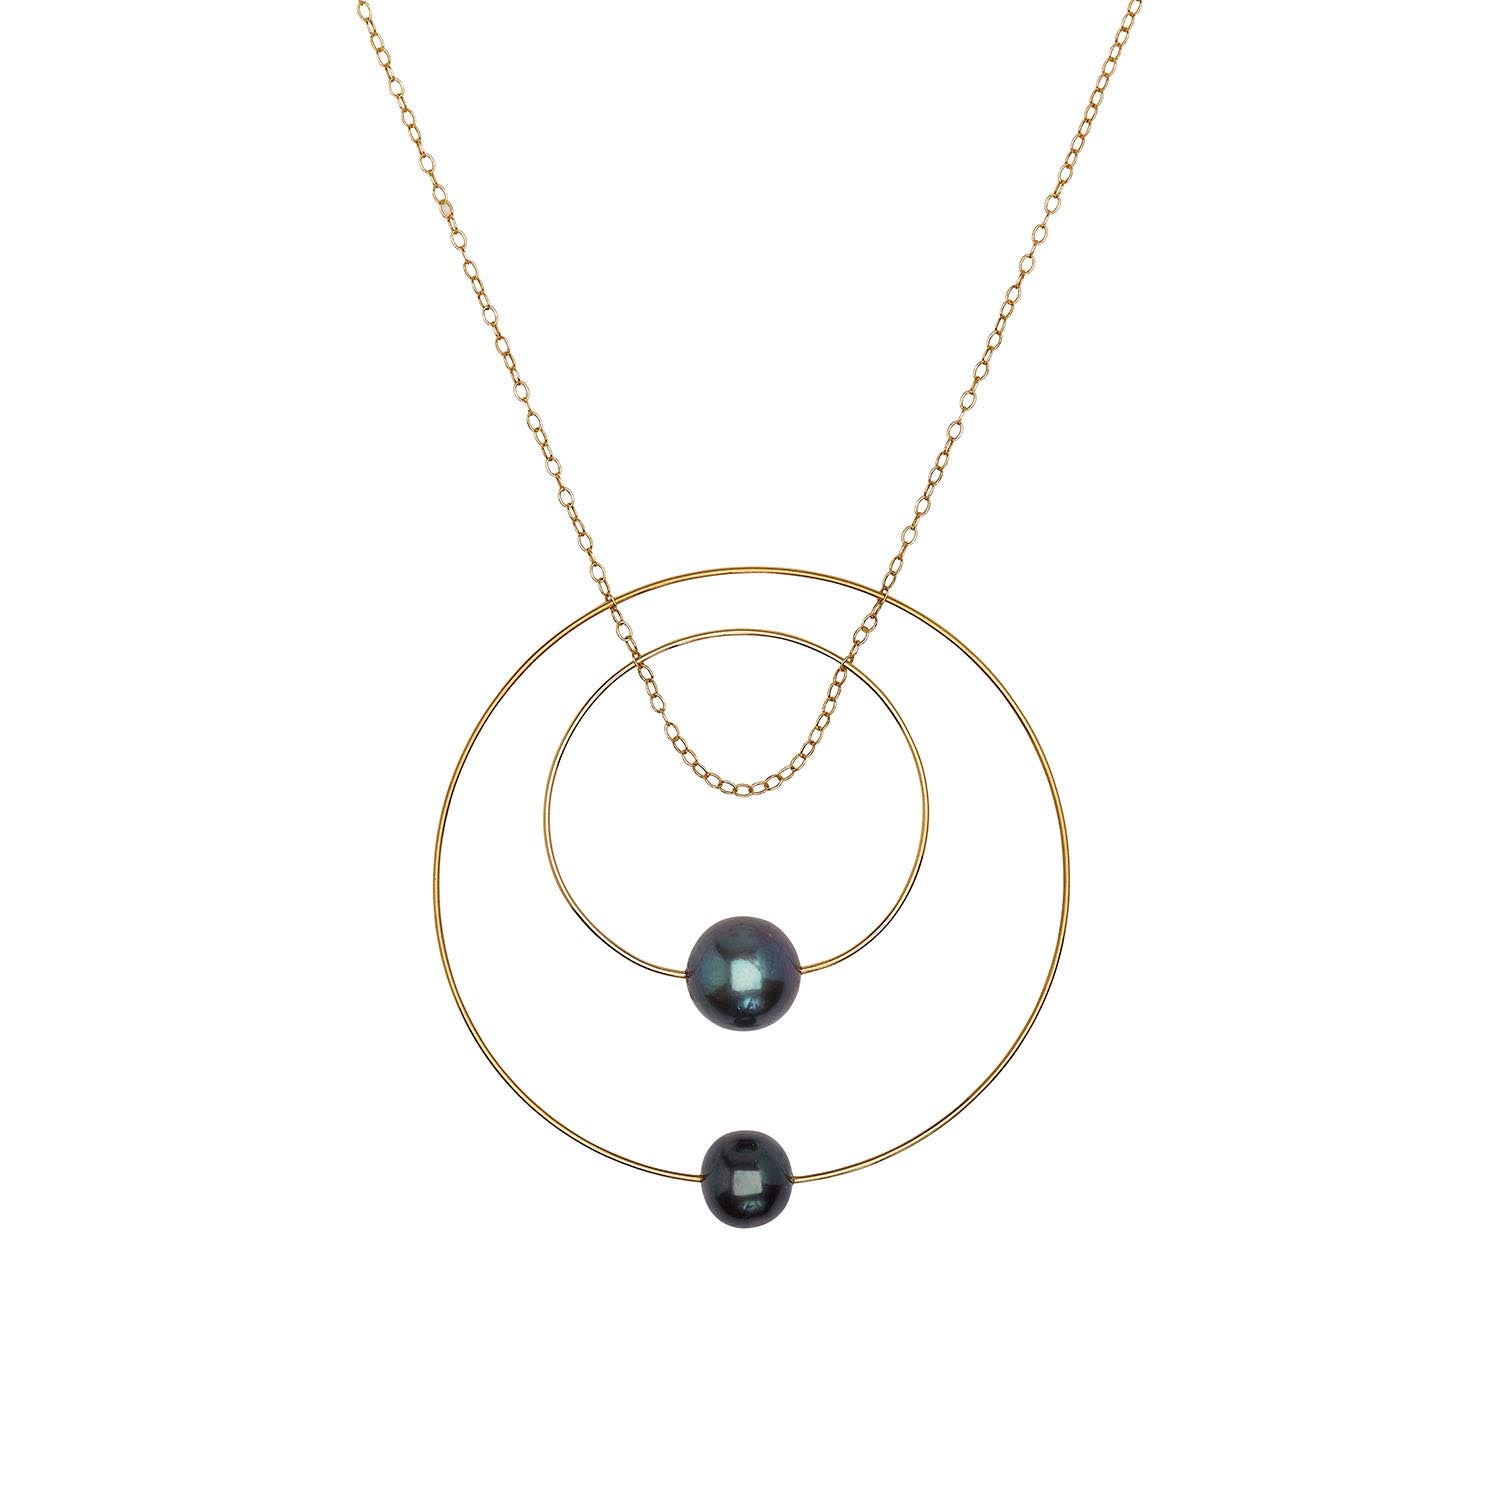 Double Circle Pendant Necklace with Peacock Pearls